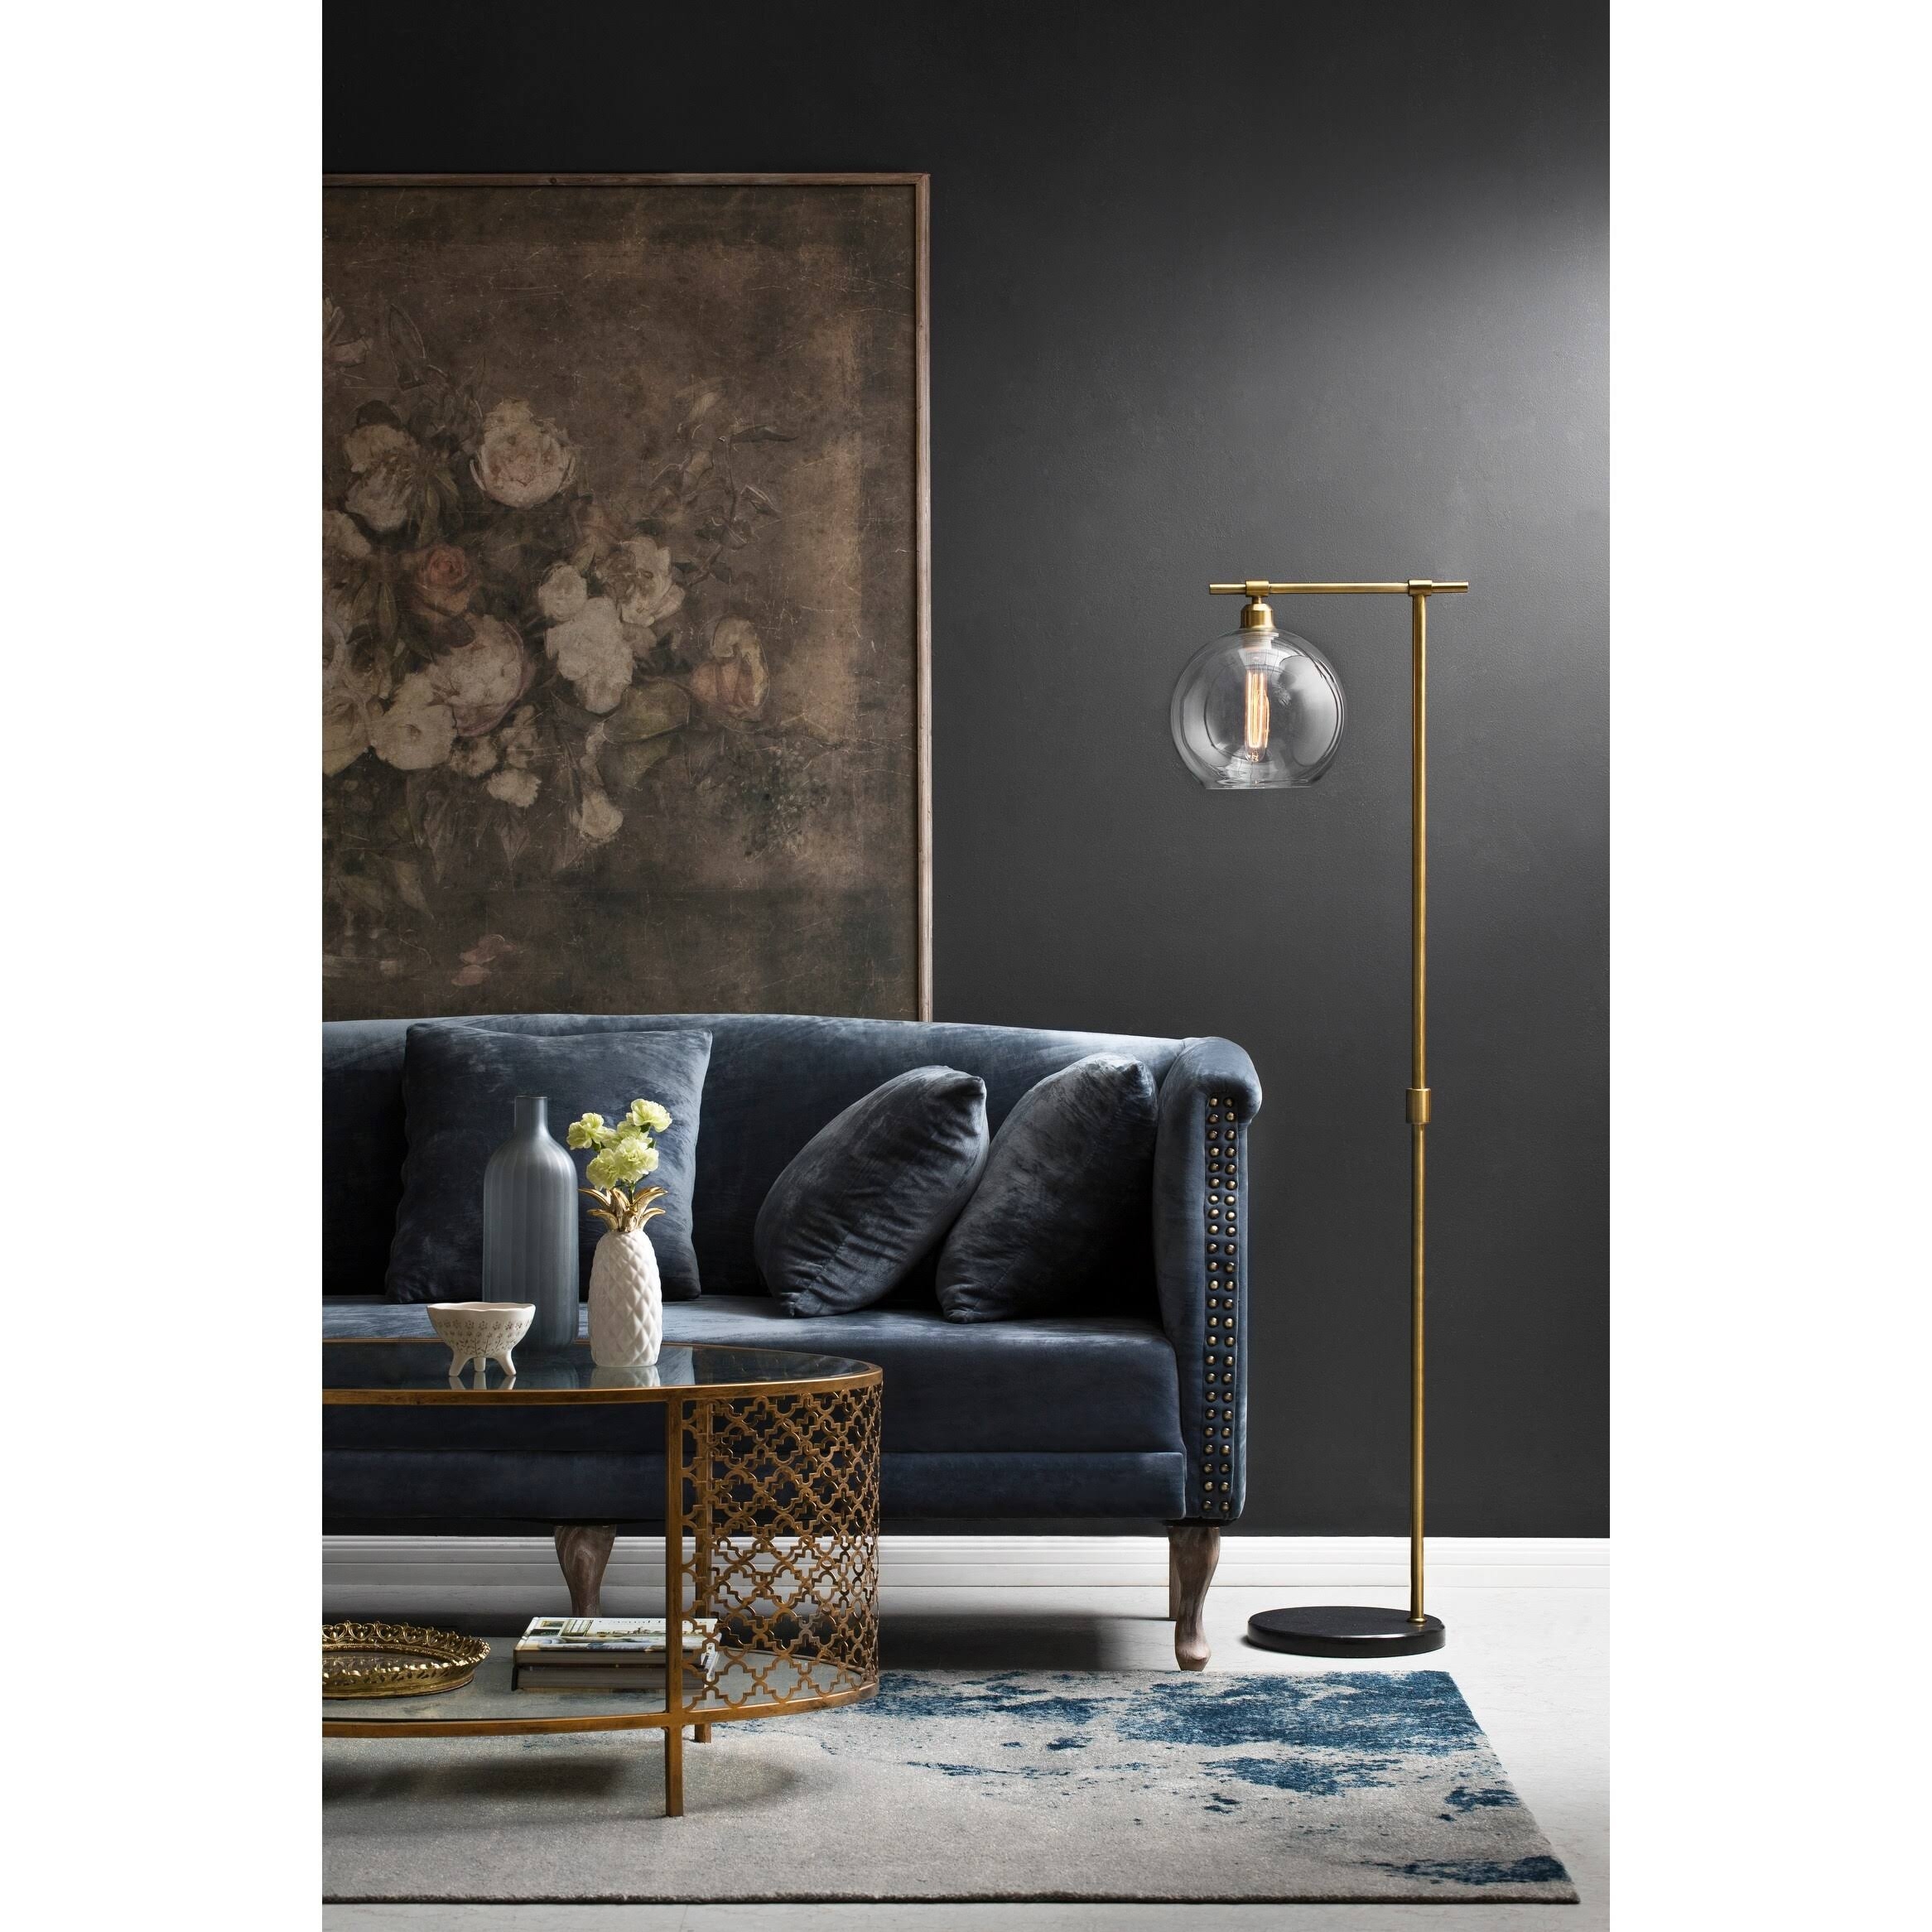 Metal & Wood Floor Lamp with Gold Finish and Glass Globe Shade - Image 2